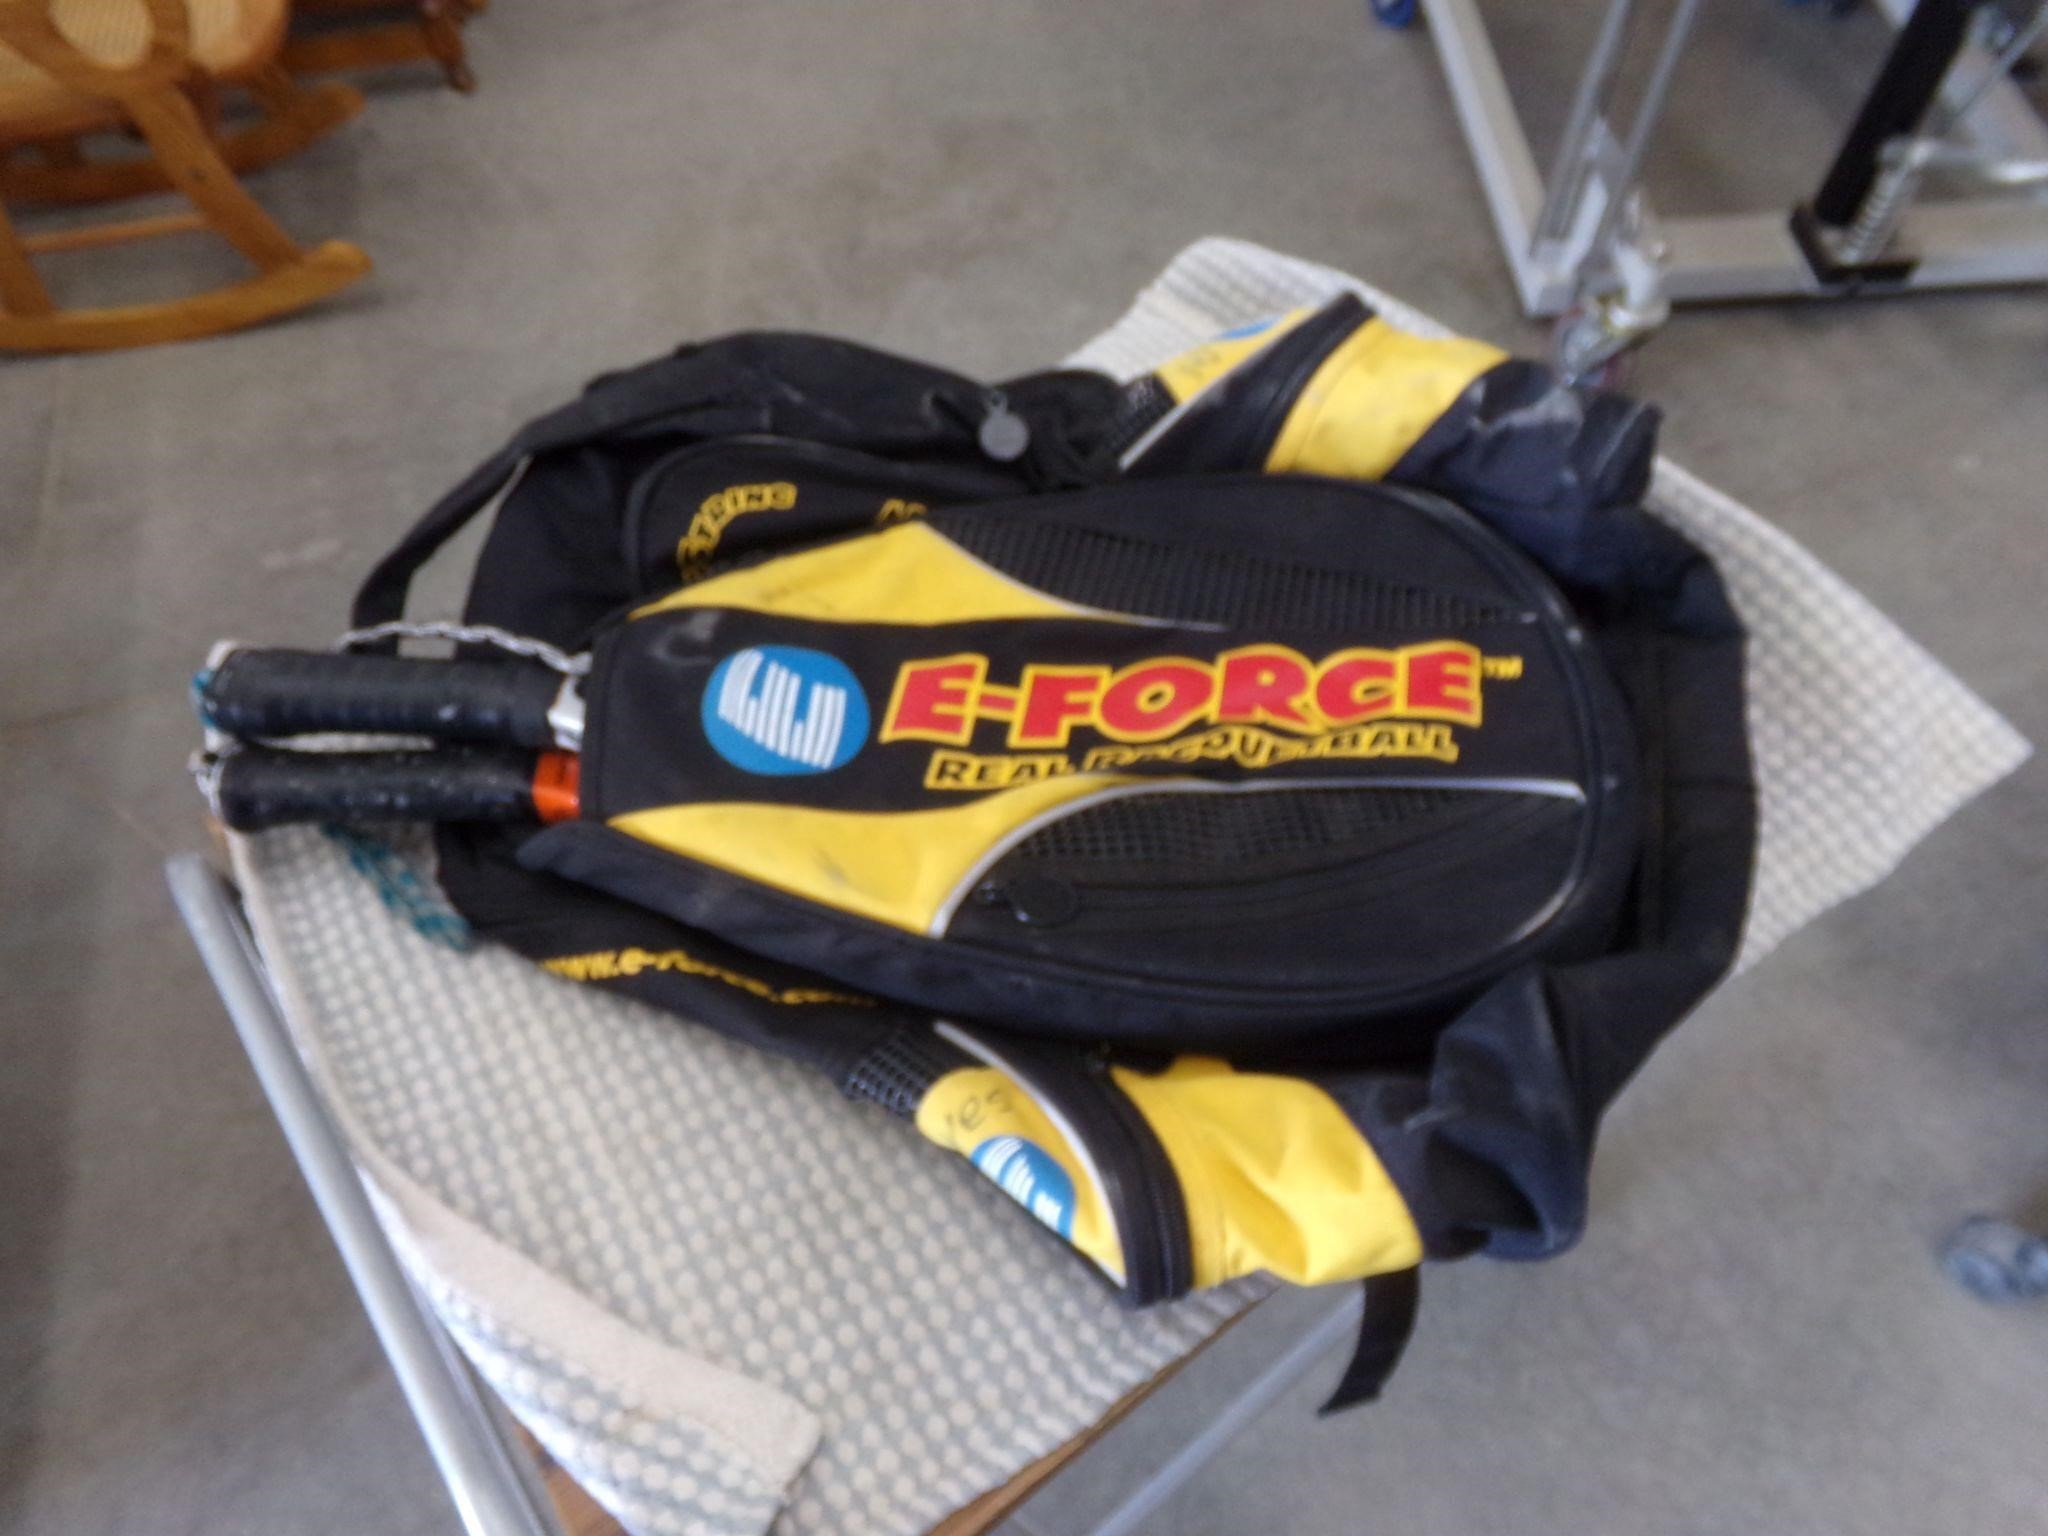 Racket ball back pack and racket